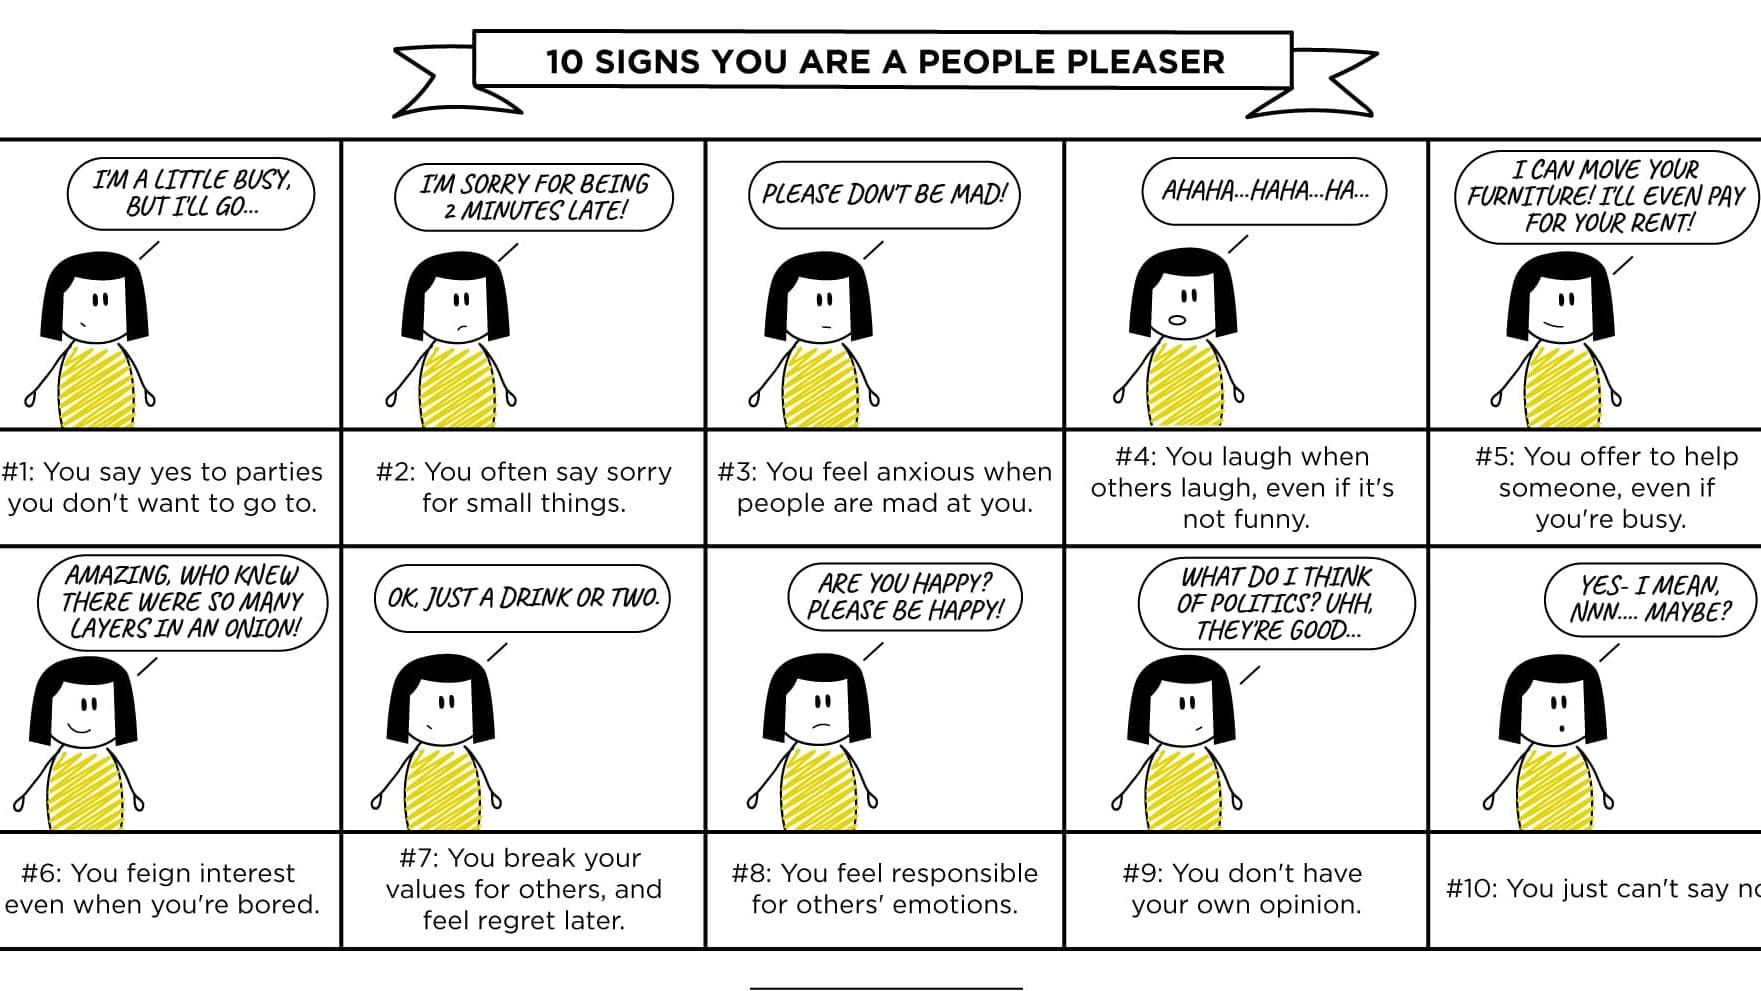 10 signs you are a people pleaser infographic